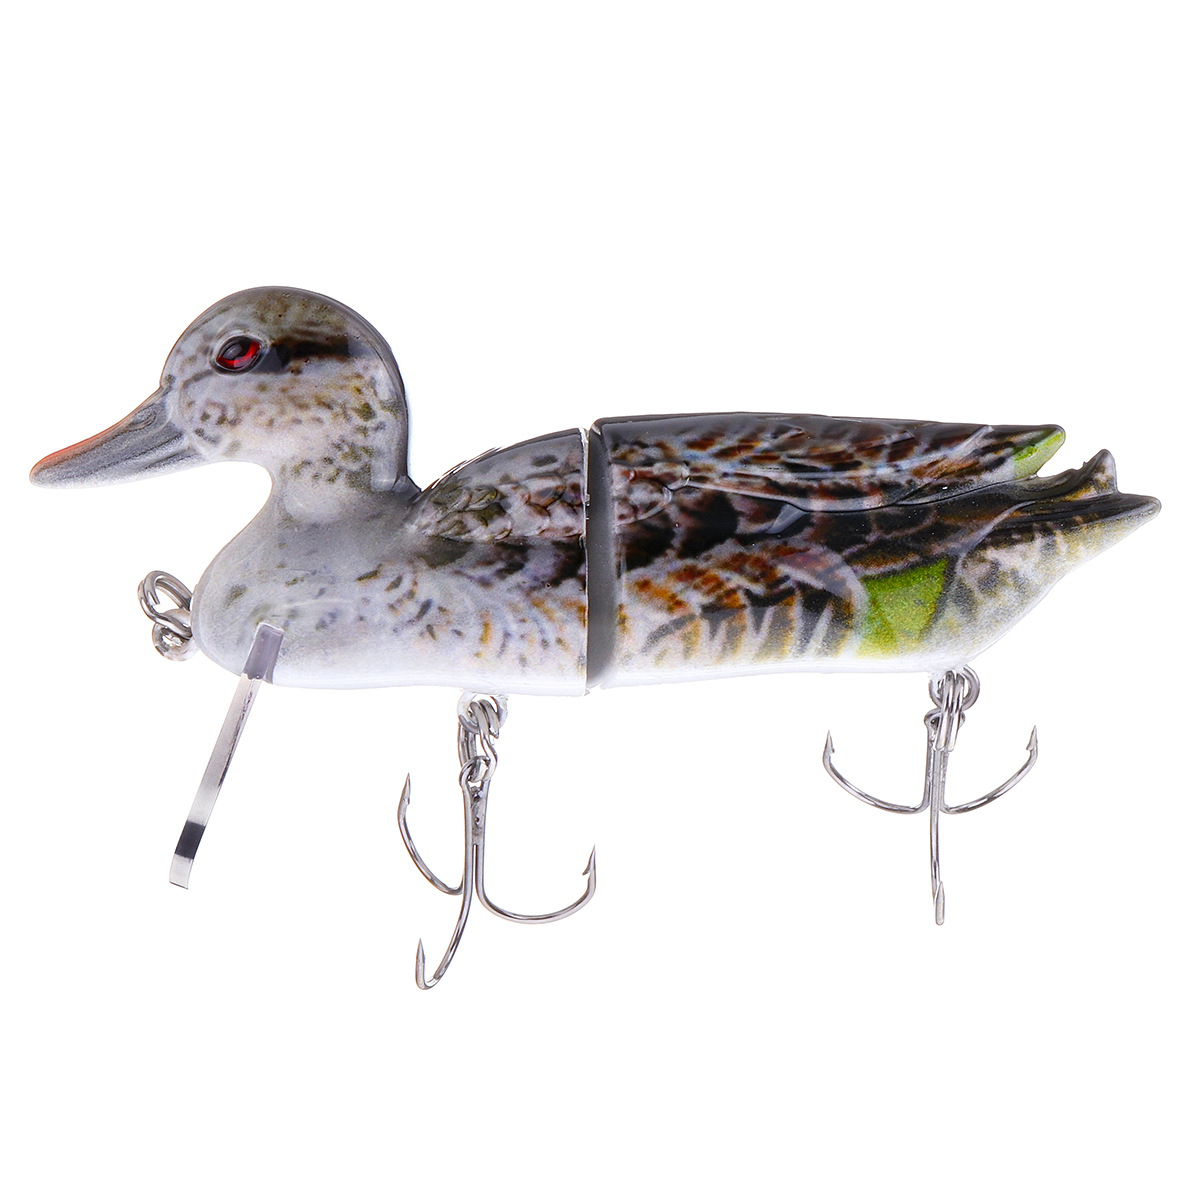 1PC-ZANLURE-6-15CM-140g-3D-Duck-Fishing-Lure-With-Hooks-Crankbait-Jointed-Hard-Baits-Minnow-Topwater-1646052-8